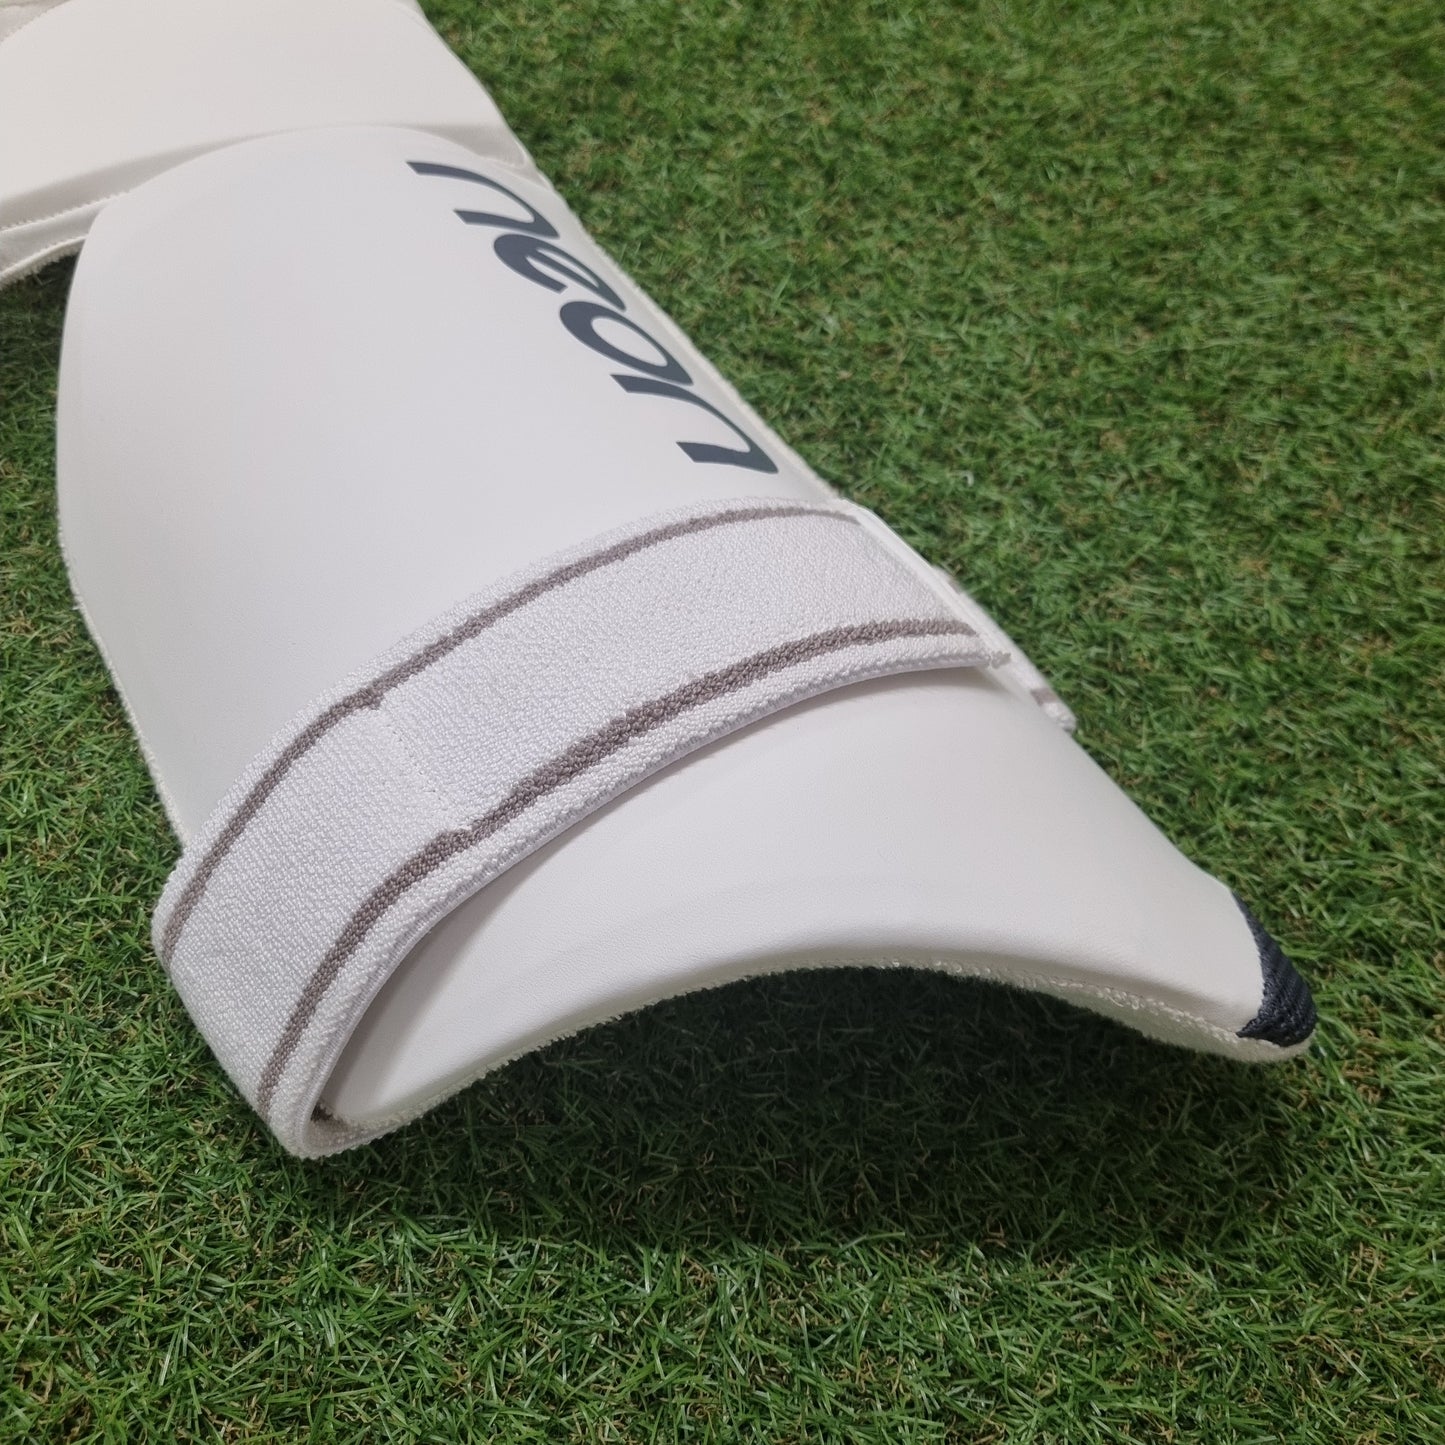 Pro Players Combi-Thigh Guard